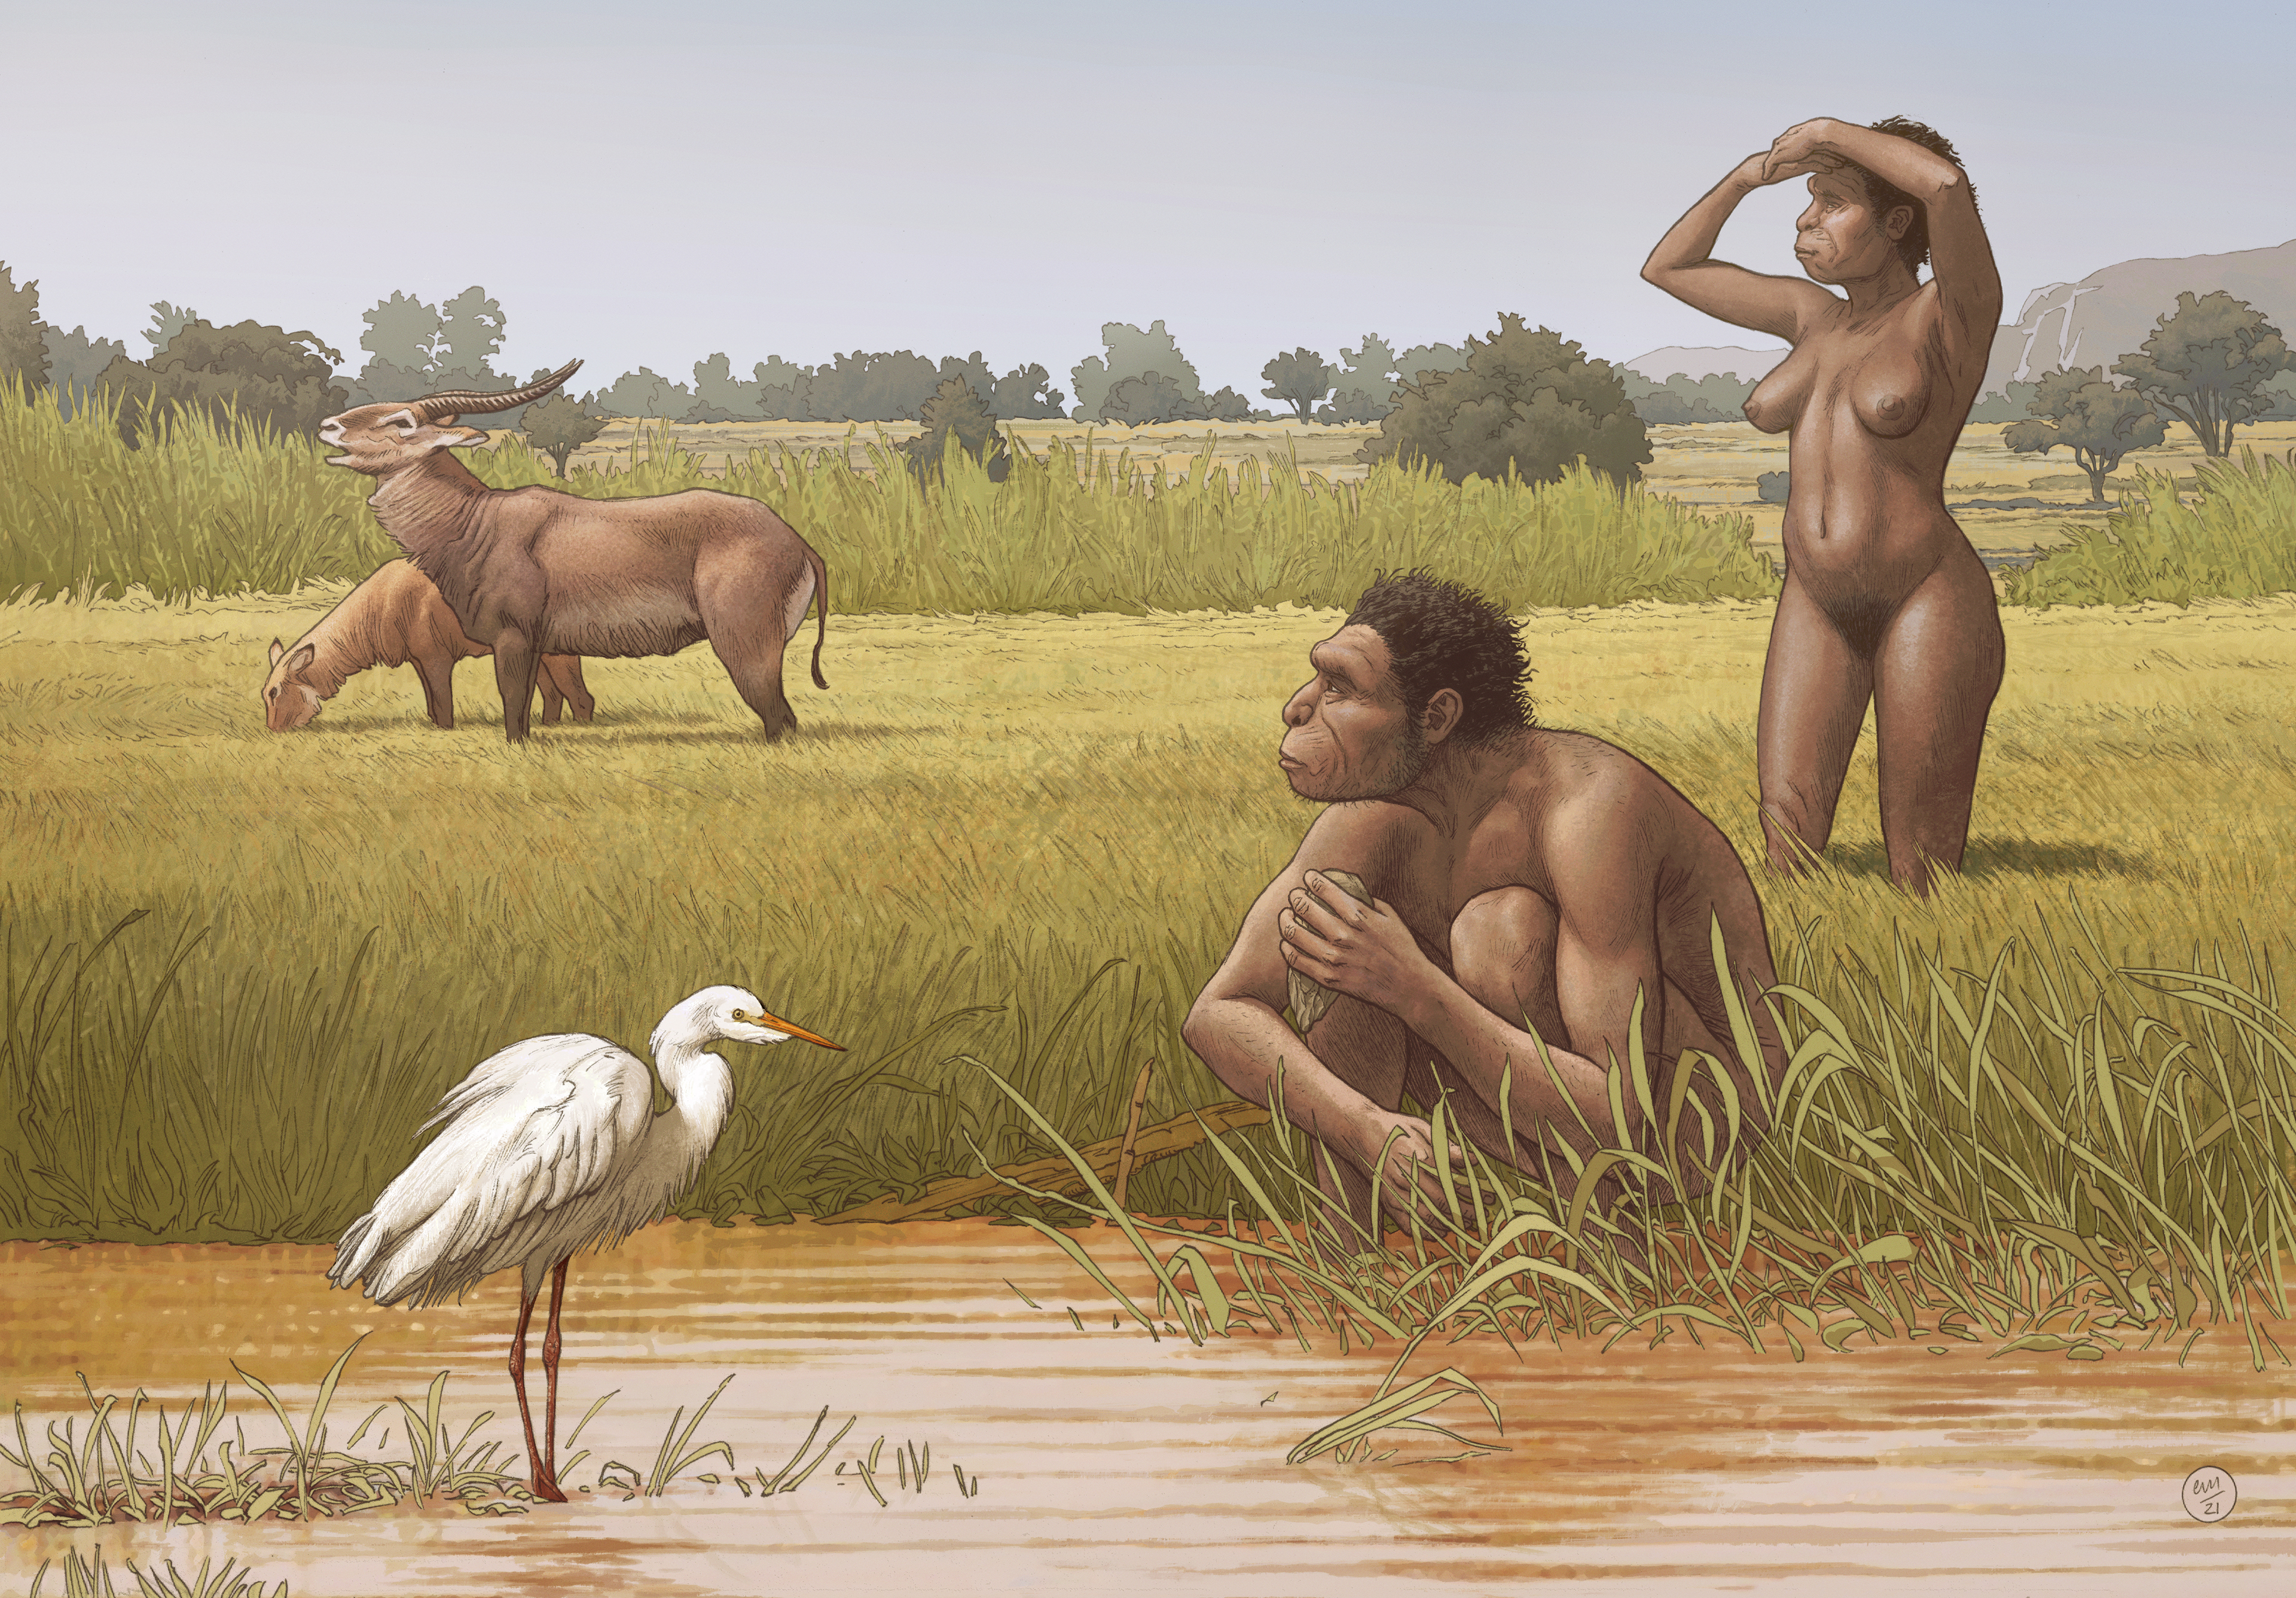 Illustration of two Homo bodoensis in the grass by a river, one crouching and one with their hands above their head,with animals